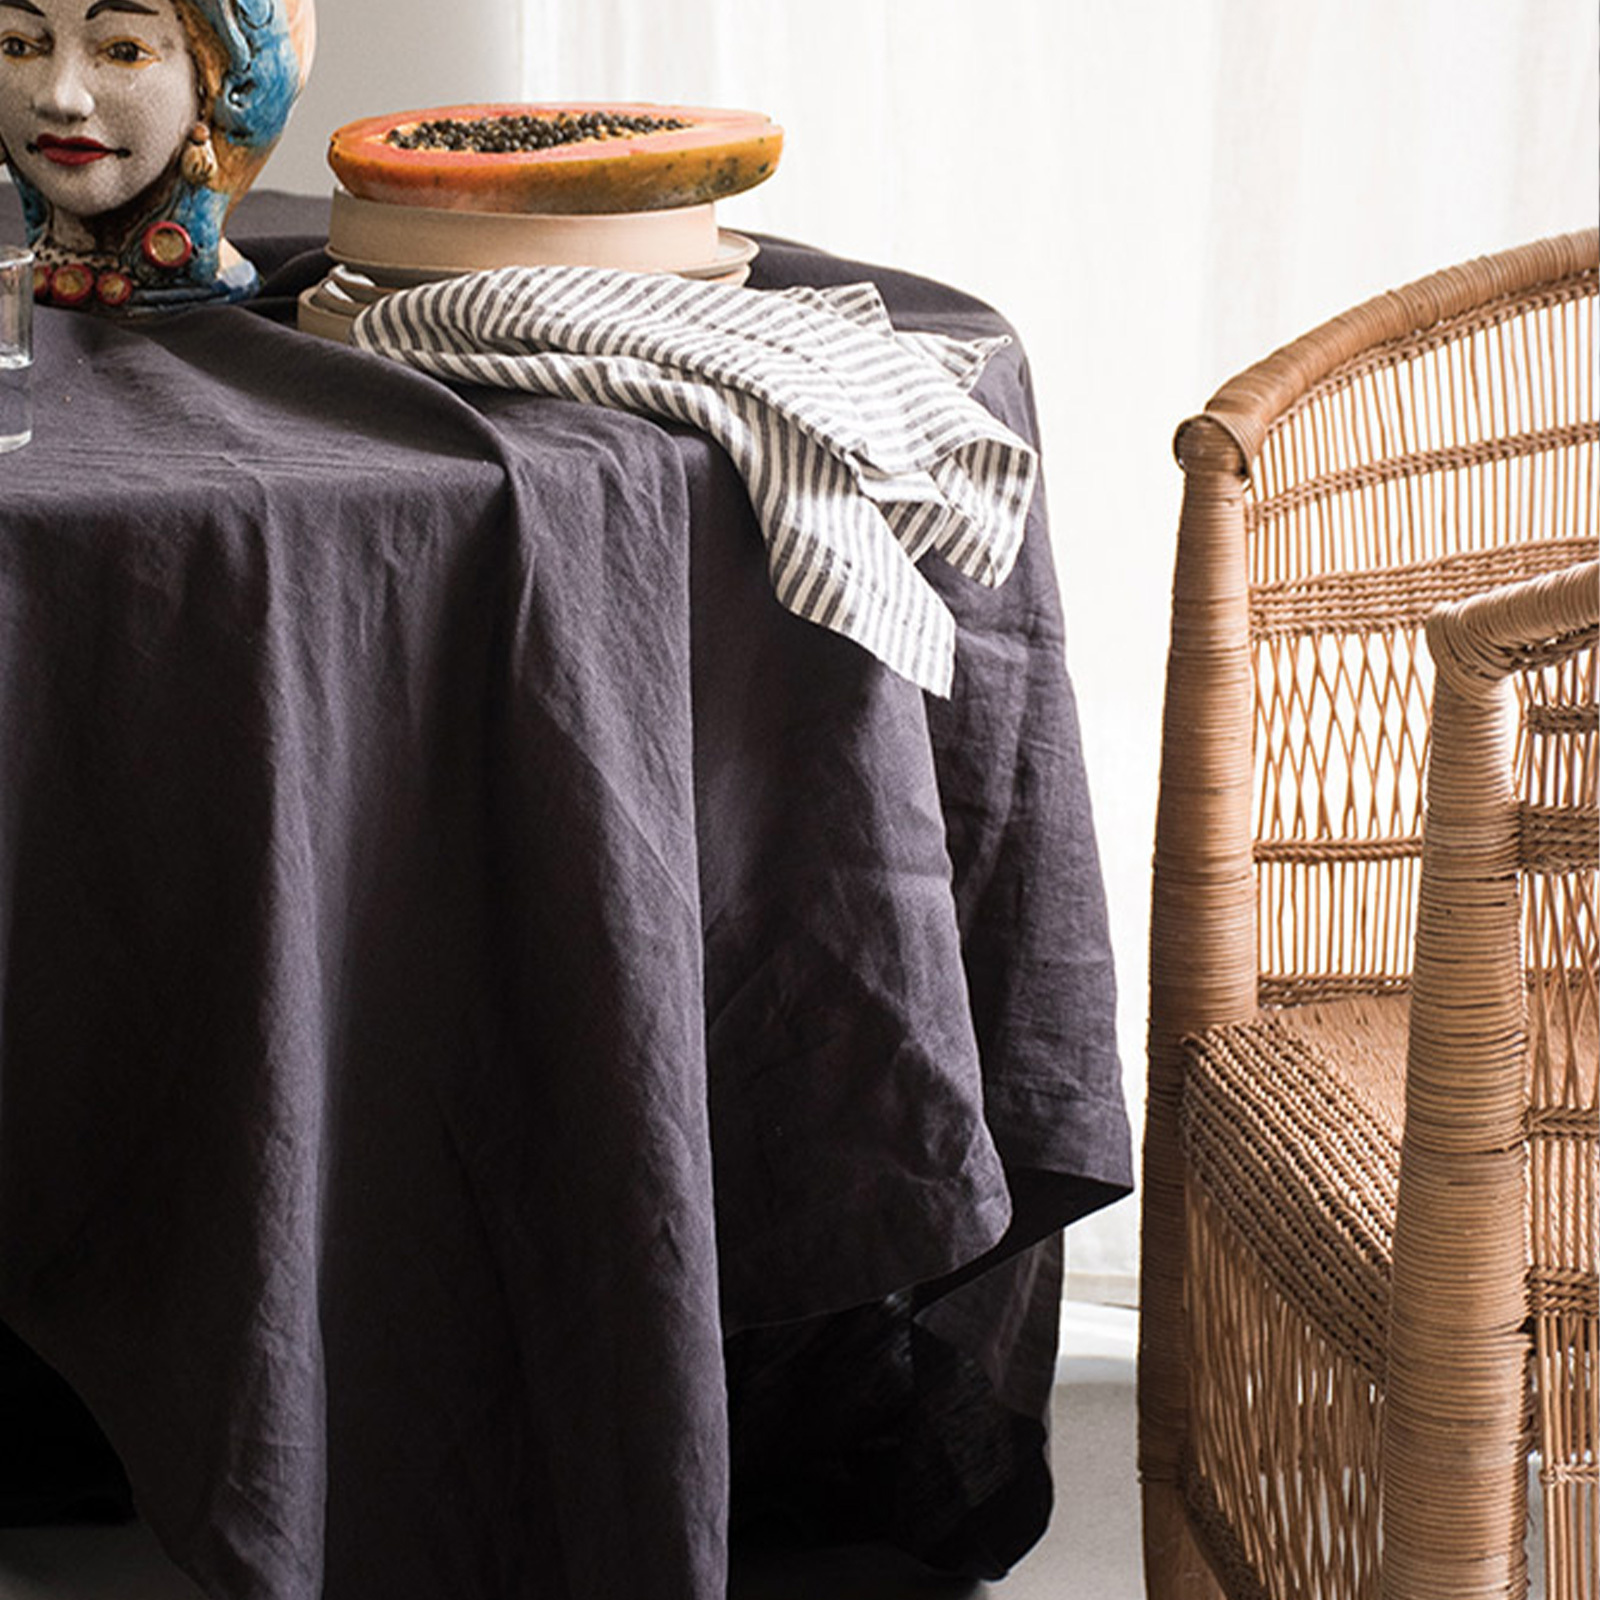 French Linen Table Cloth in Inky Charcoal